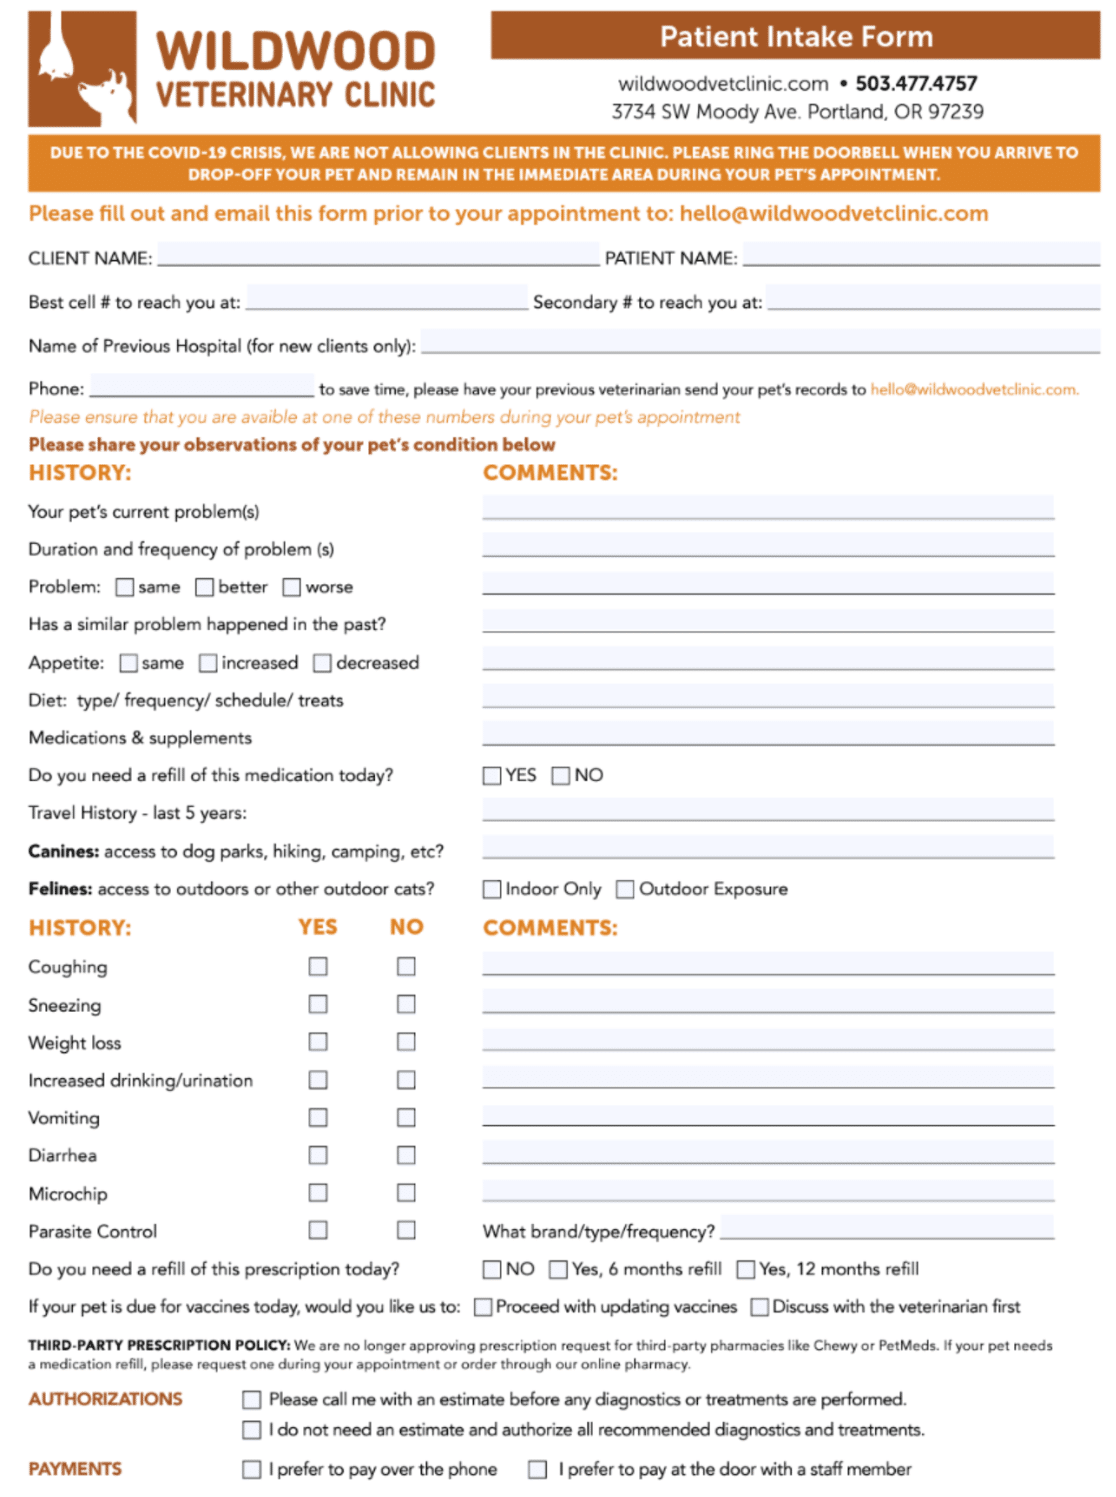 An example of veterinarian patient intake form for a vet clinic